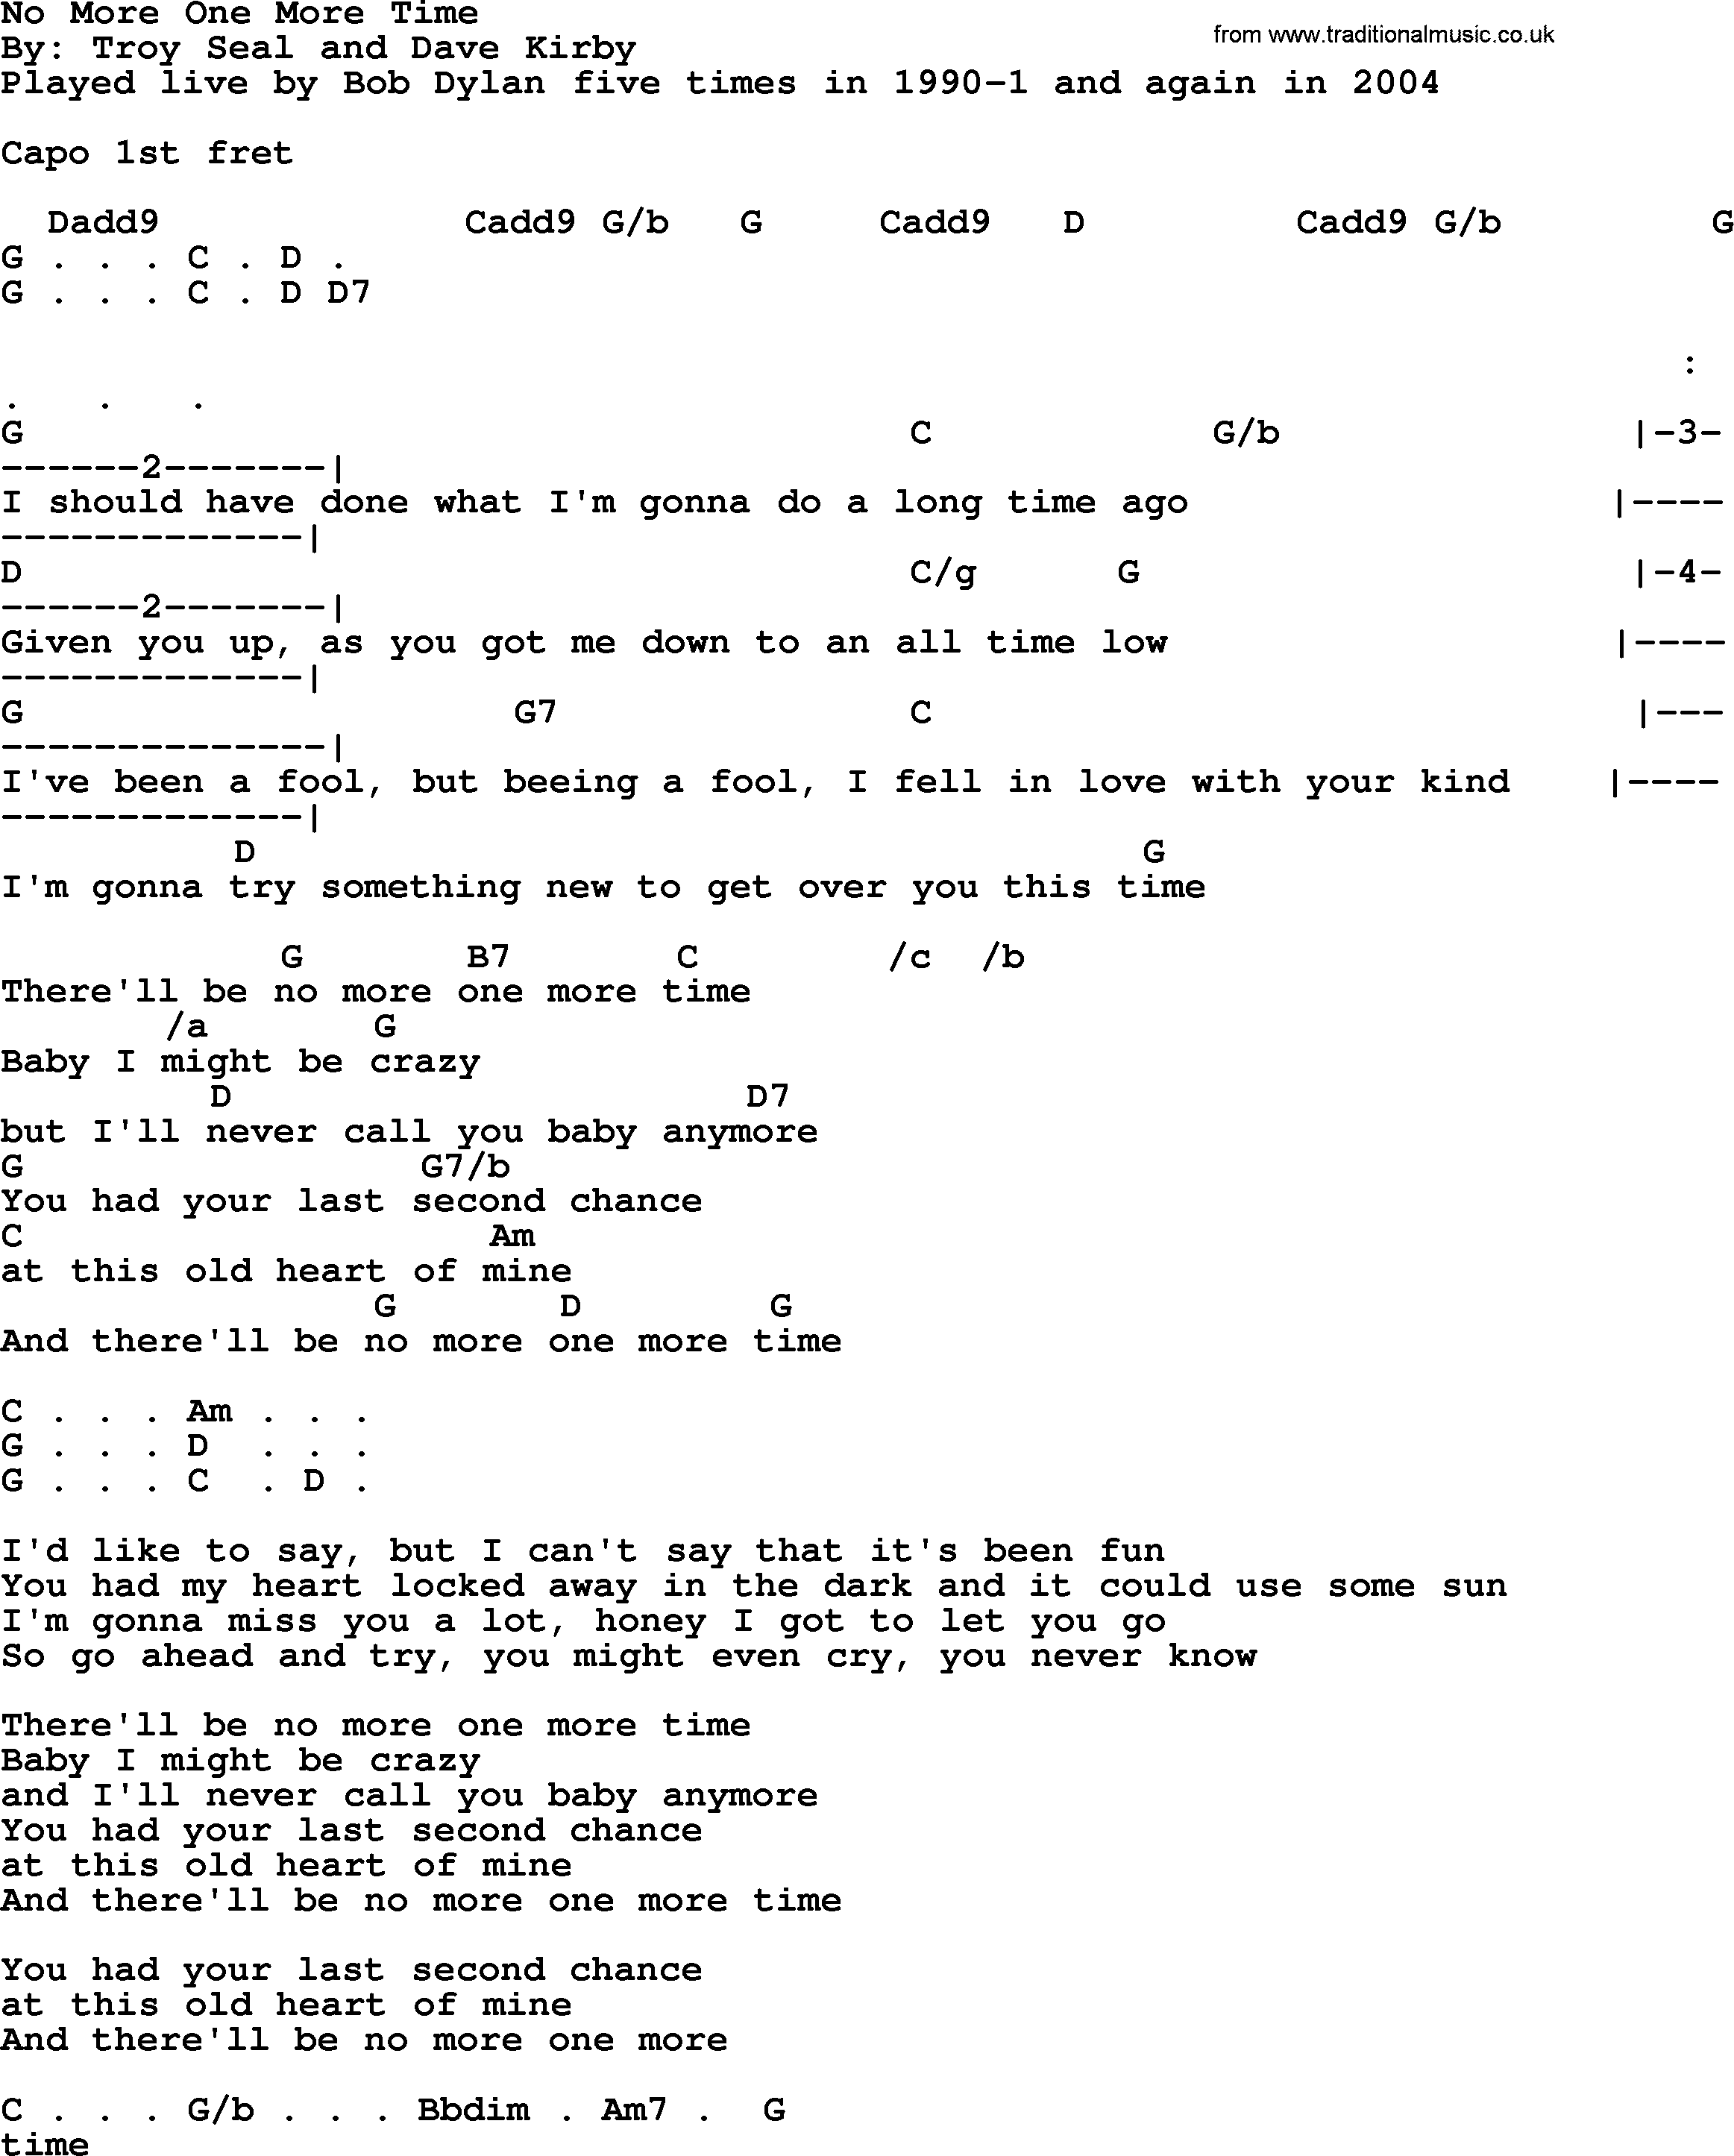 Bob Dylan song, lyrics with chords - No More One More Time